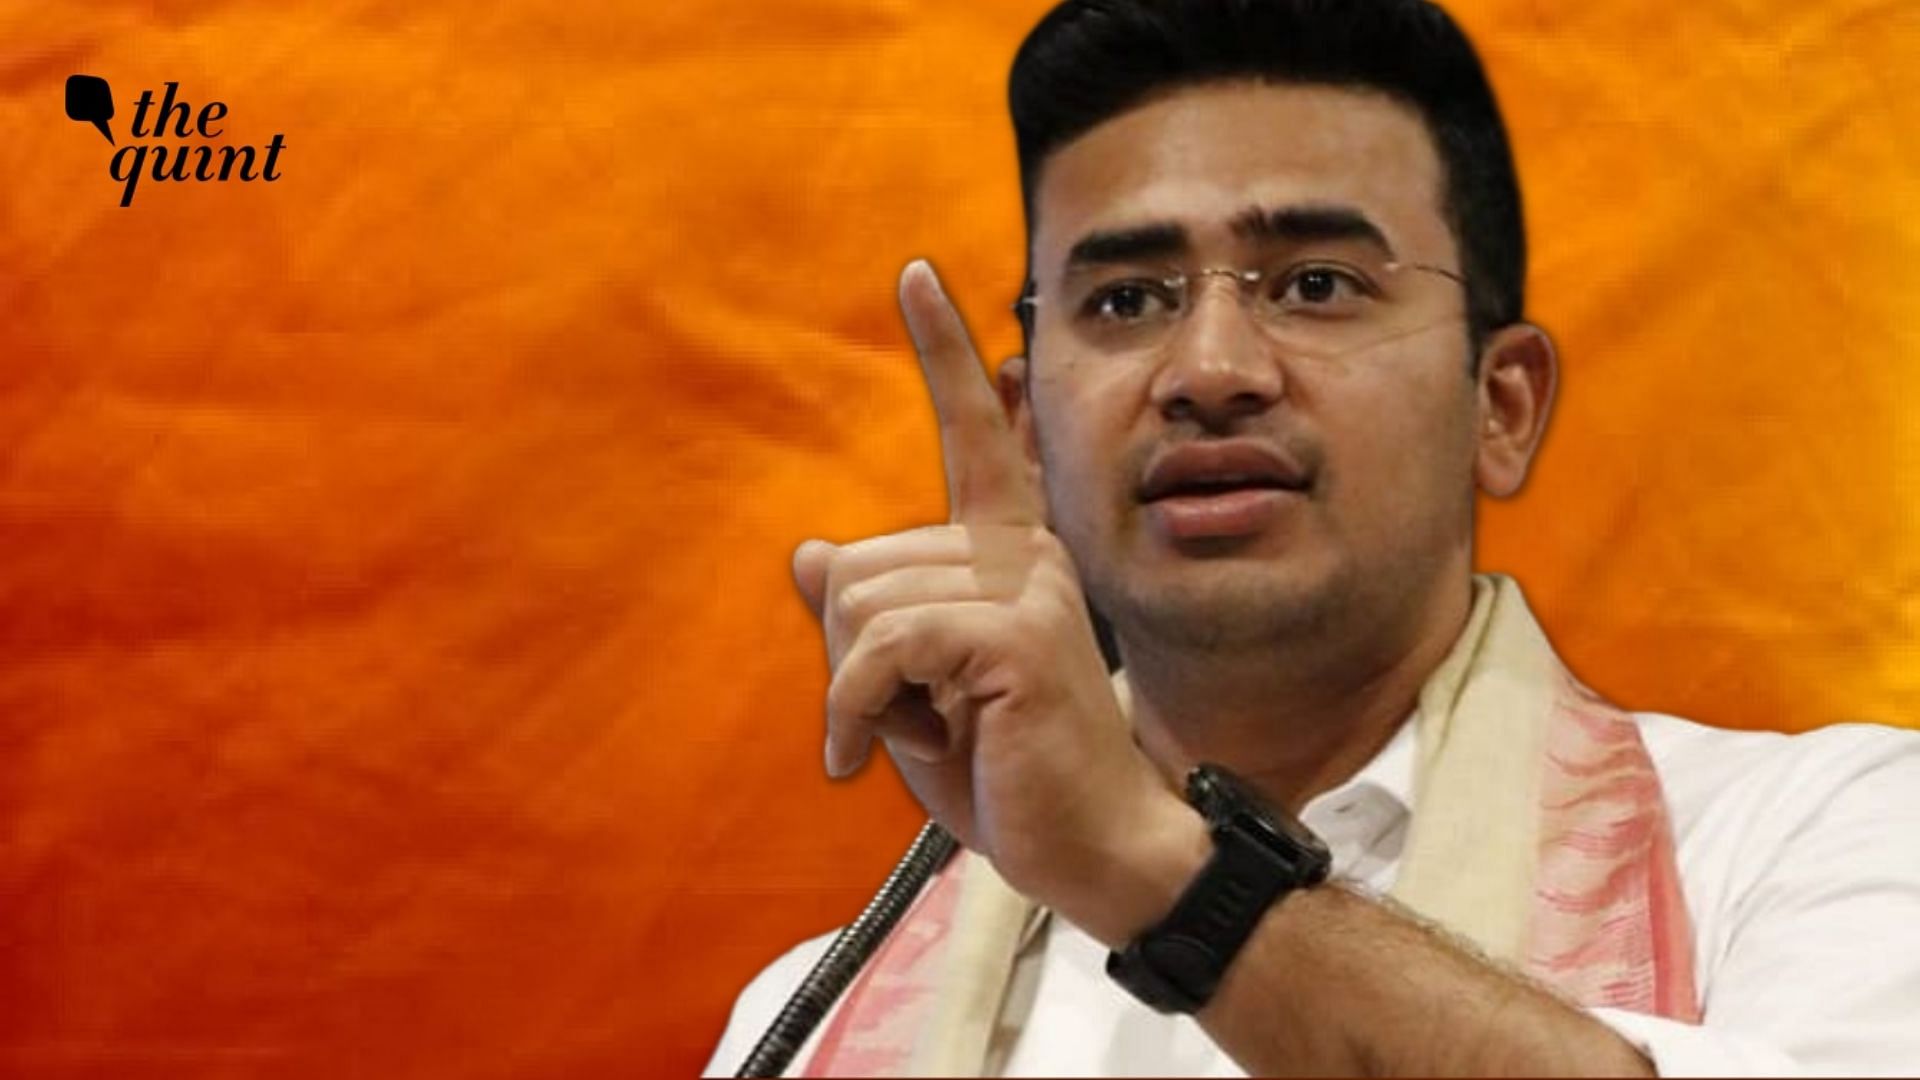 <div class="paragraphs"><p>For those familiar with Tejasvi Surya’s provocative and divisive speeches, his <a href="https://www.thequint.com/news/karnataka-bjp-mp-tejasvi-surya-calls-for-ghar-wapsi-of-muslims-christians">statement calling for ‘ghar wapsi’</a> (religious conversion to Hinduism) of Muslims and Christians did not come as a huge surprise.</p></div>